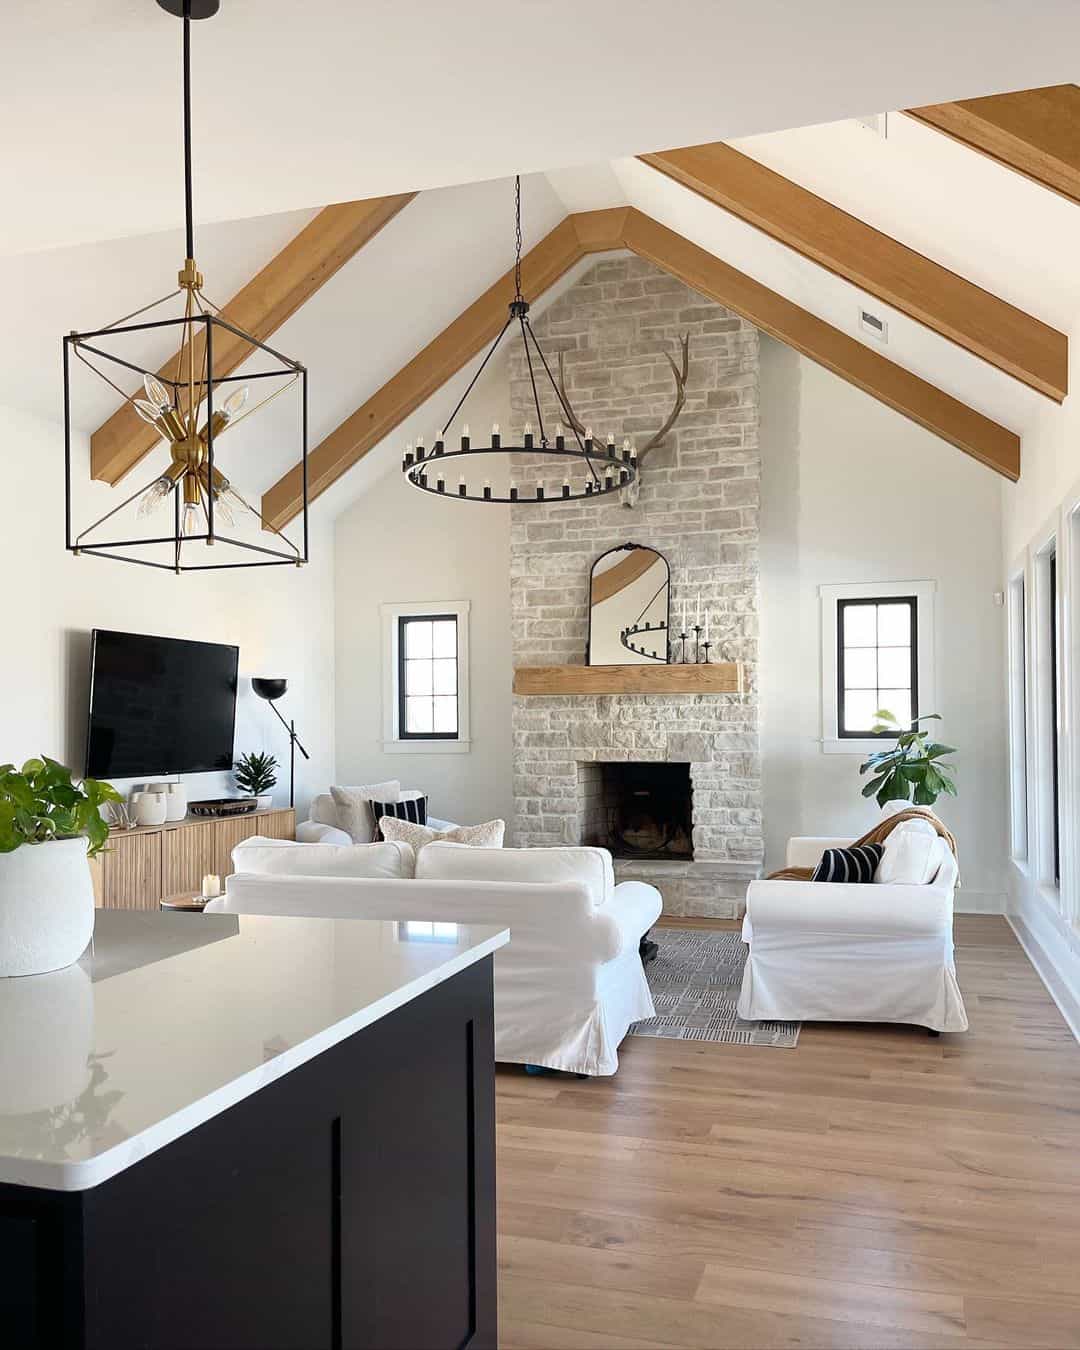 Open Concept Living Room and Kitchen With Stone Fireplace - Soul & Lane